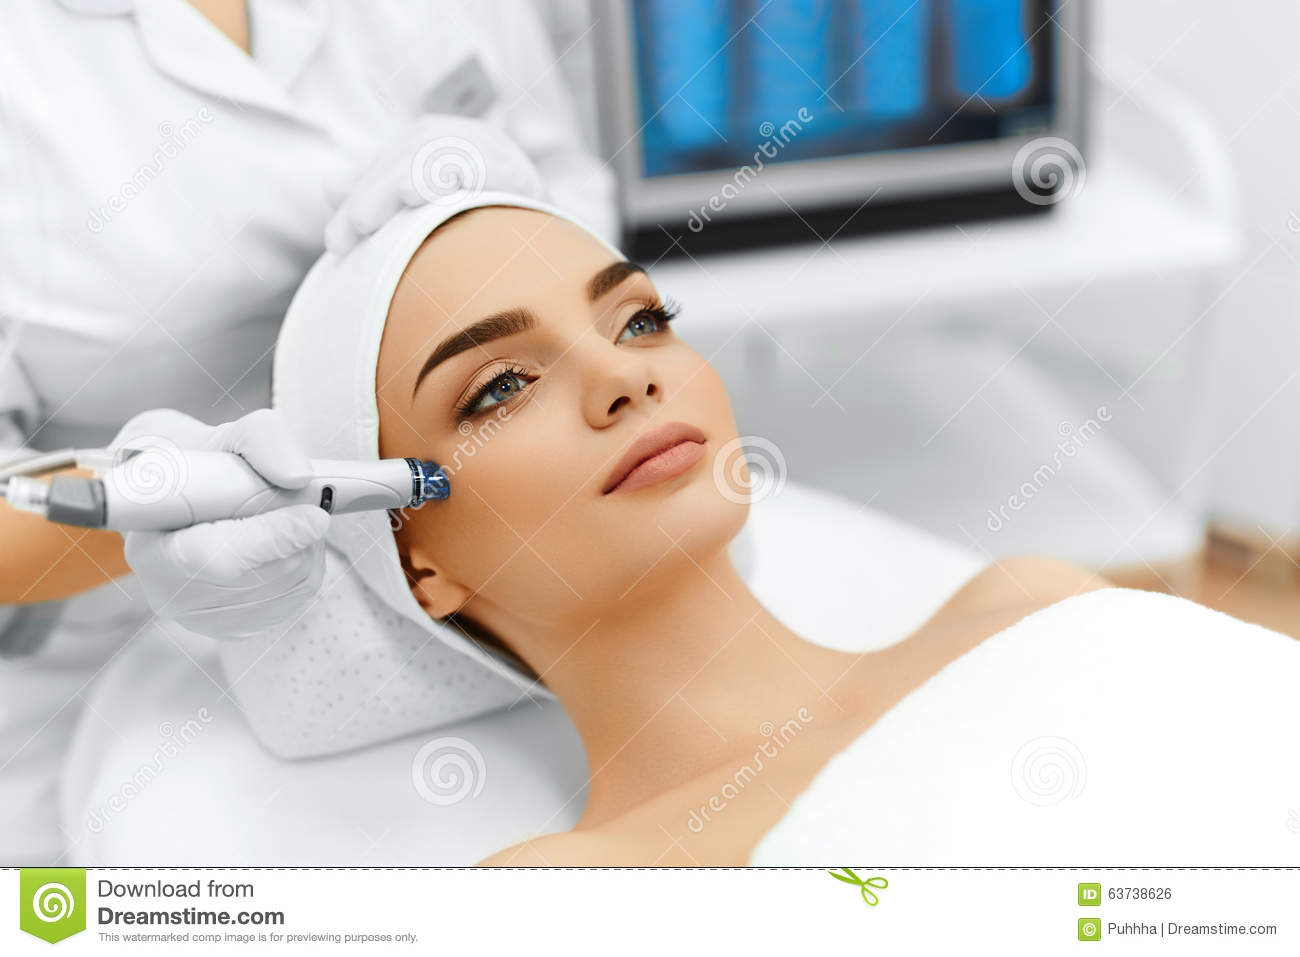 Skin Care Images Free Download